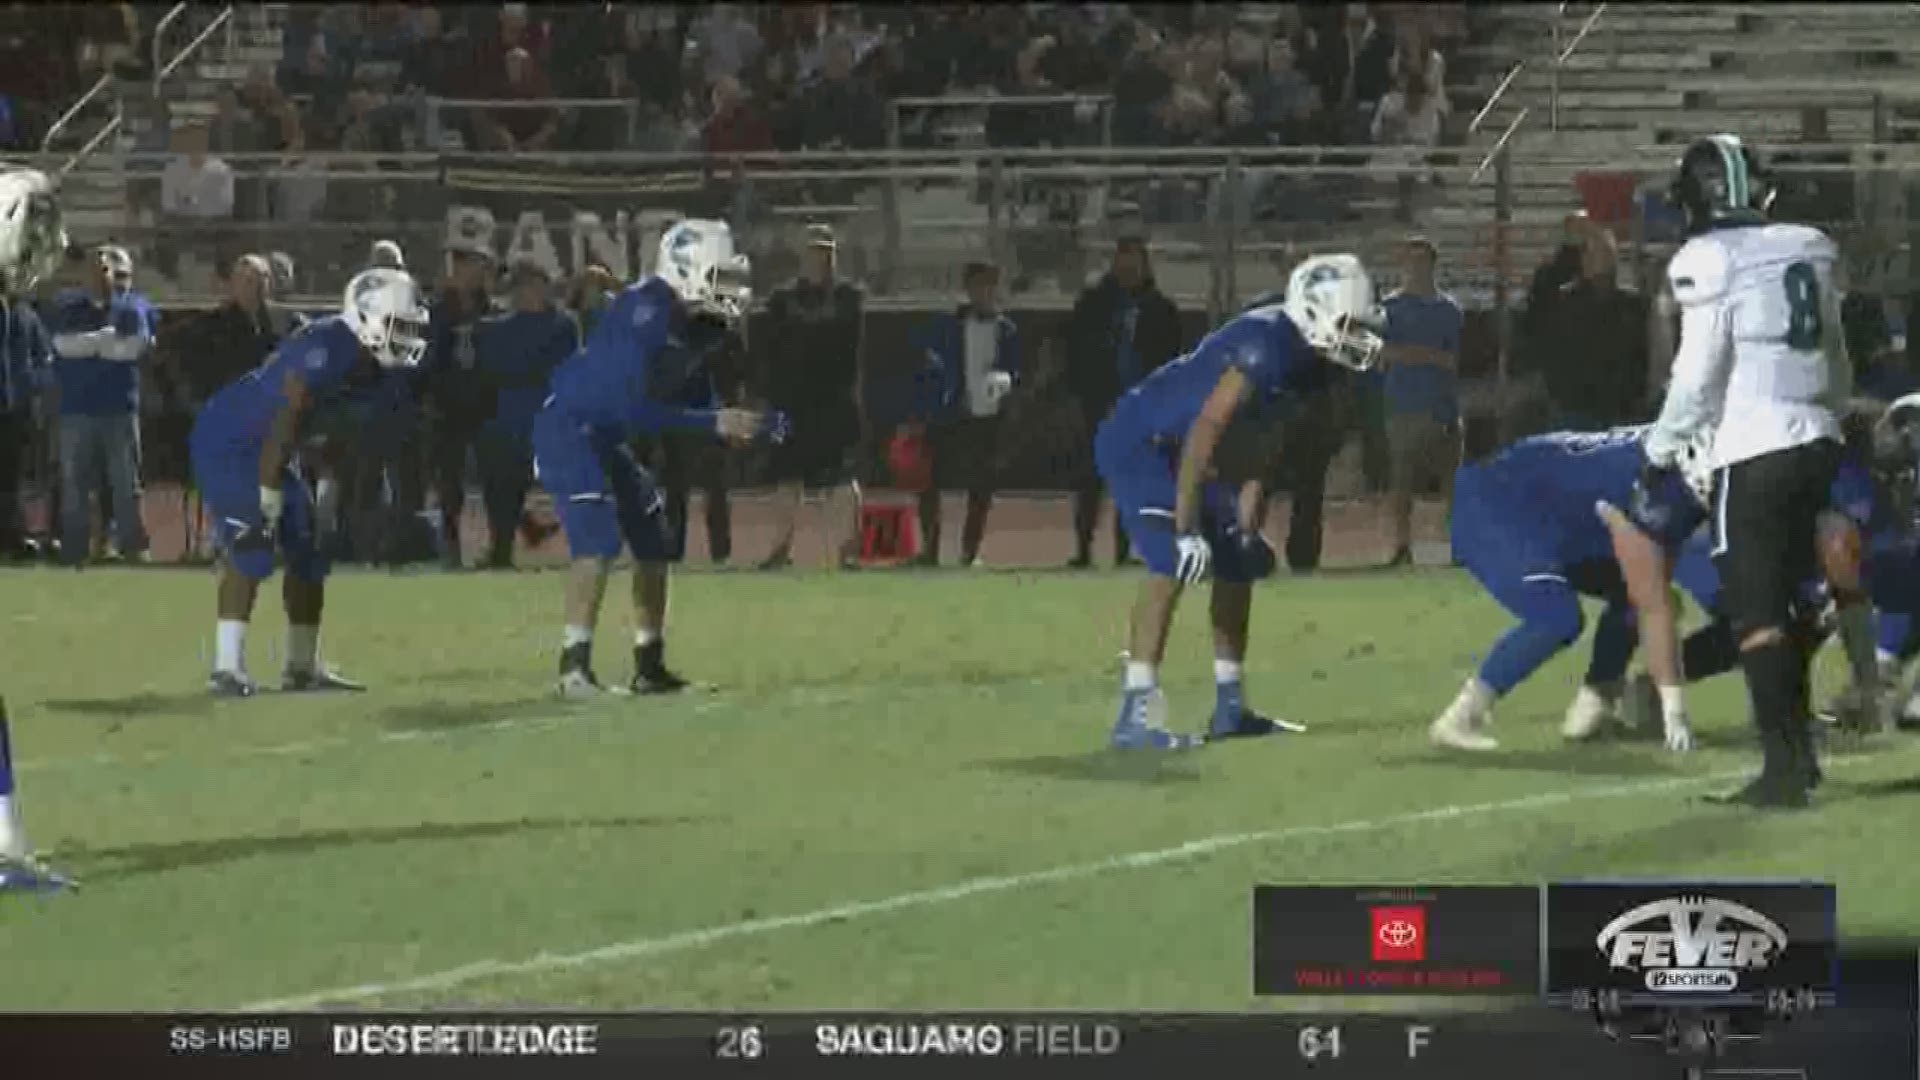 Chandler prevails in a nail-biting game that came down to the last minute as they defeated Highland 36-35.